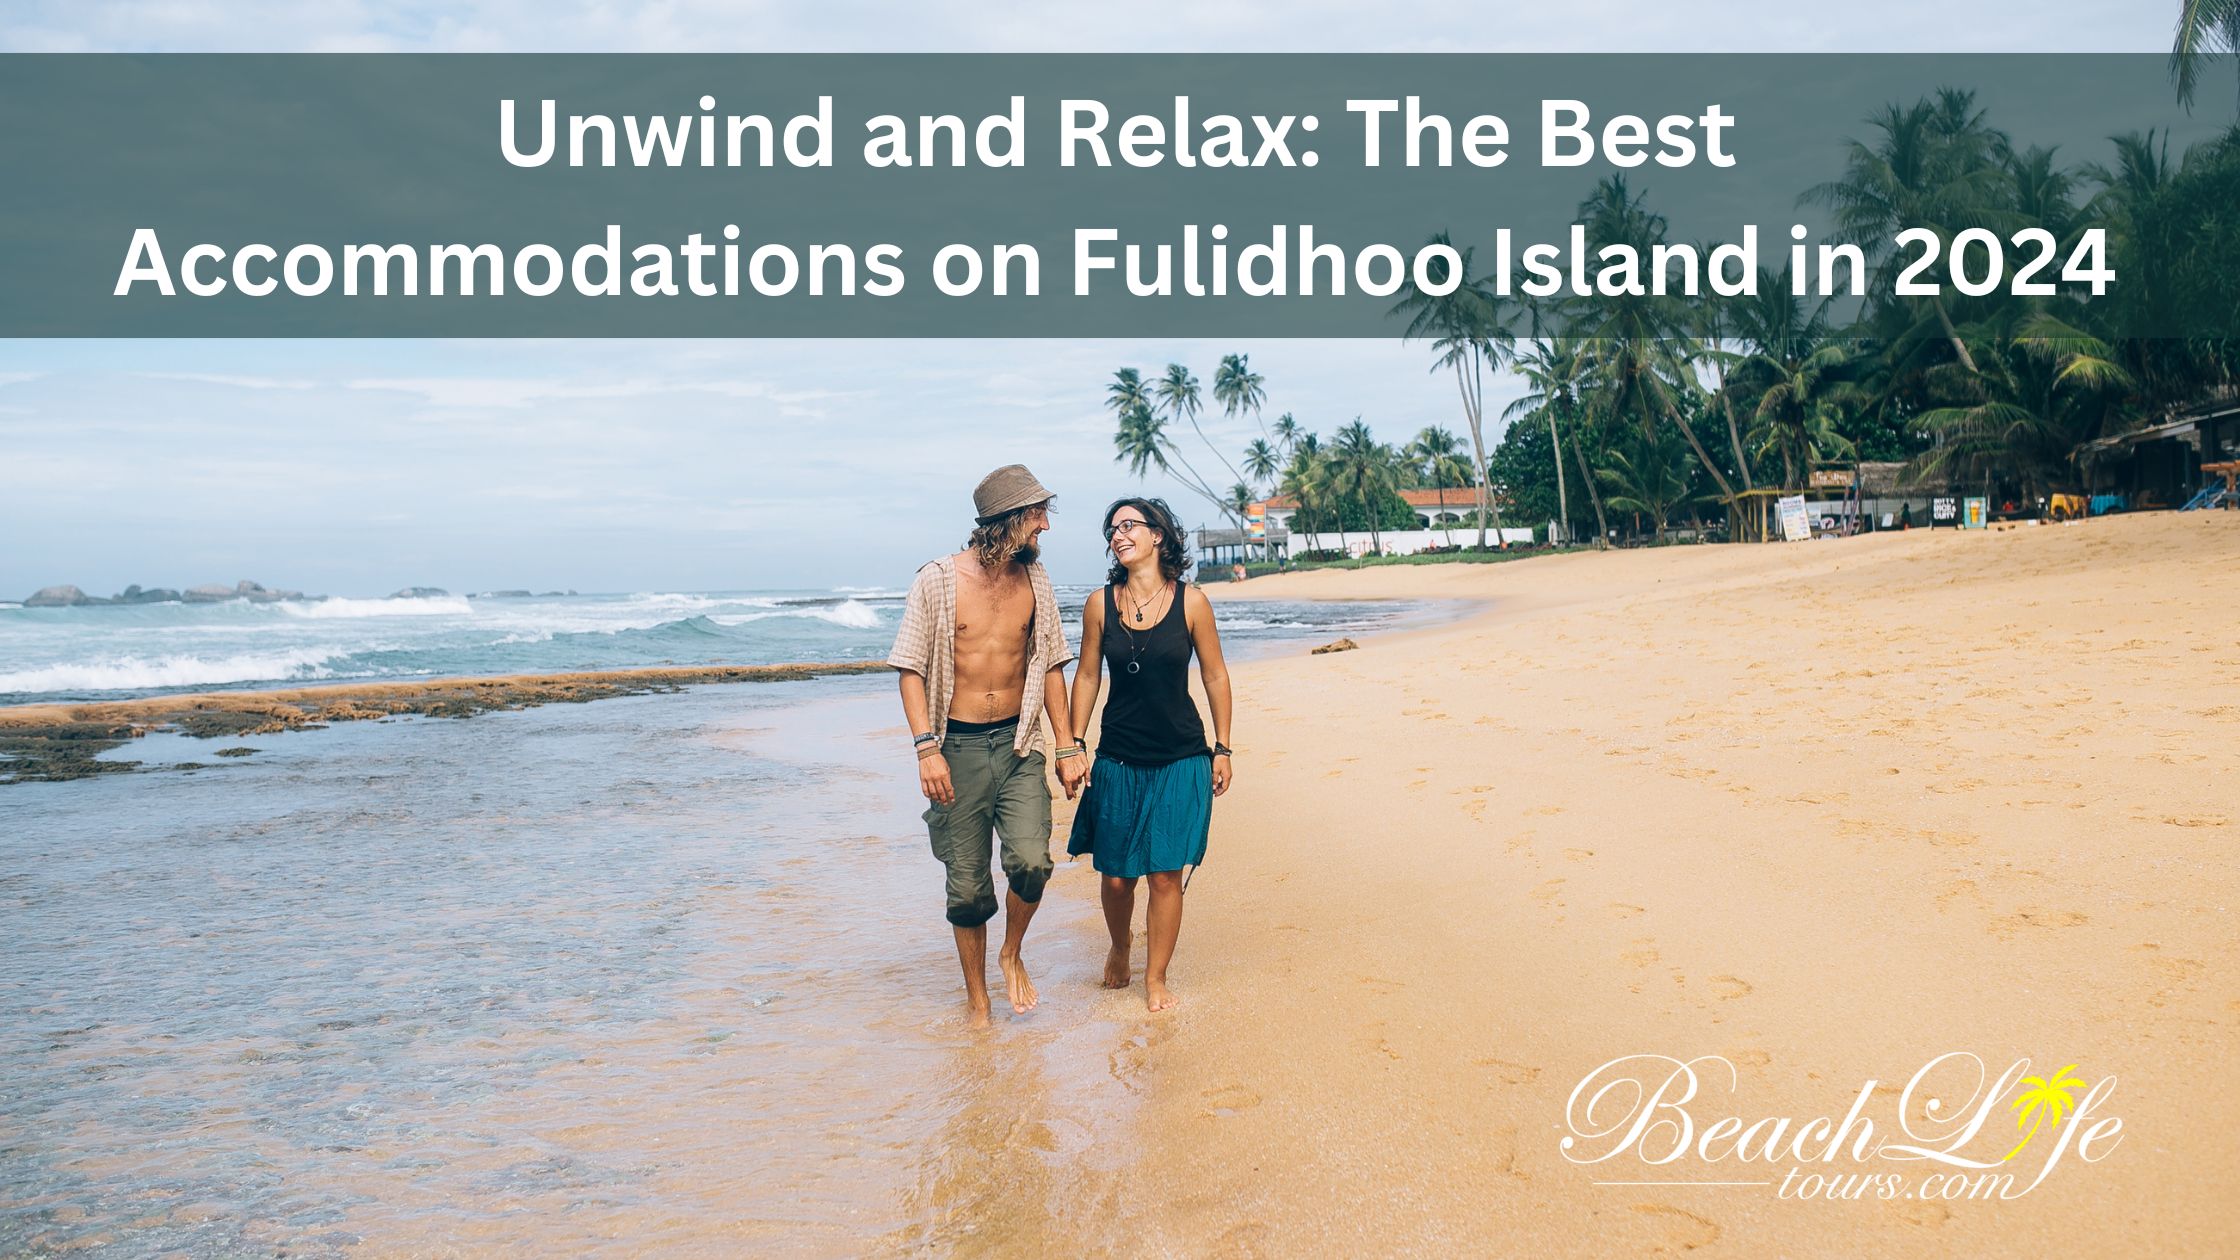 Unwind and Relax: The Best Accommodations on Fulidhoo Island in 2024